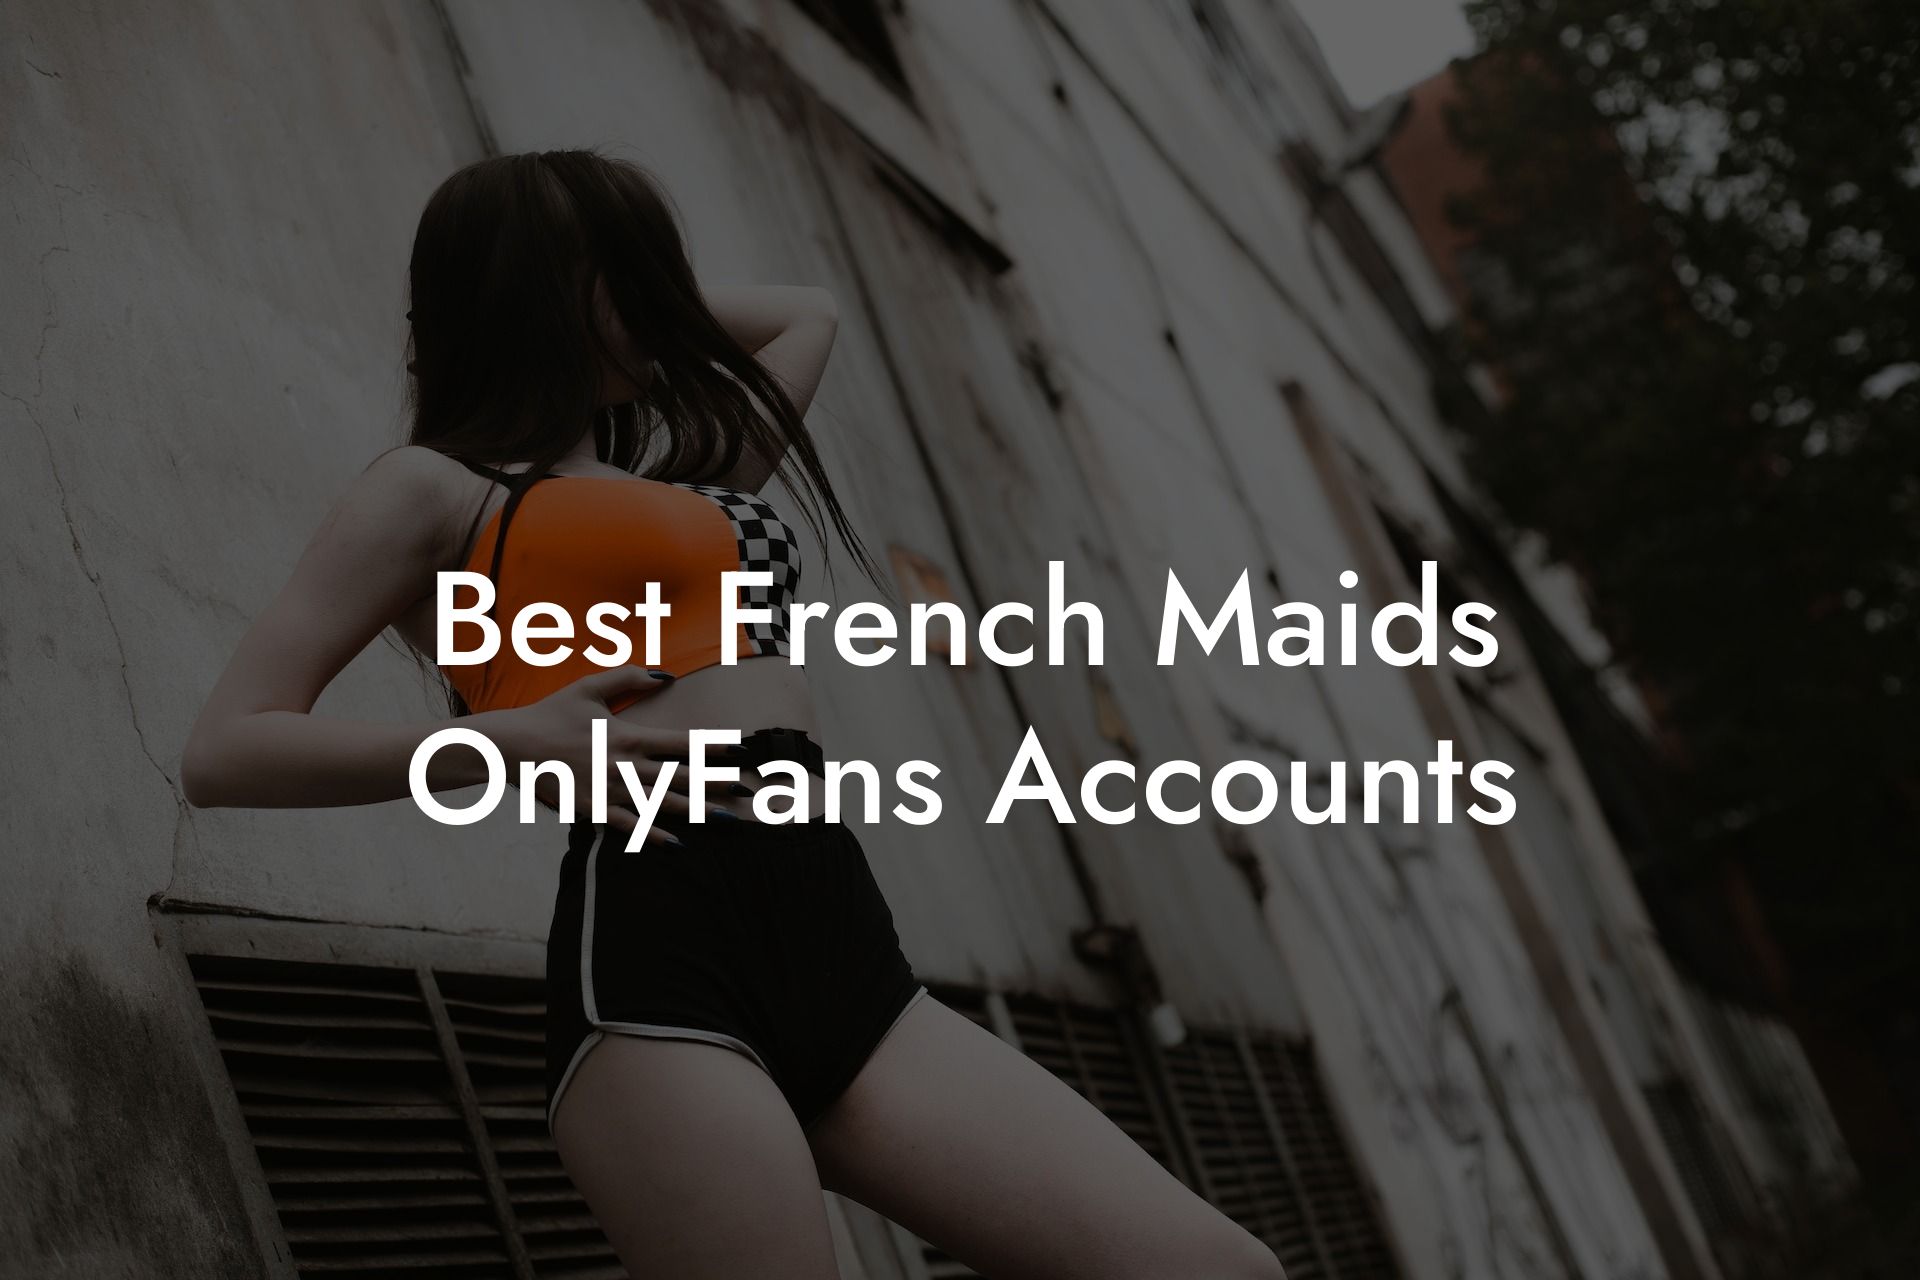 Best French Maids OnlyFans Accounts